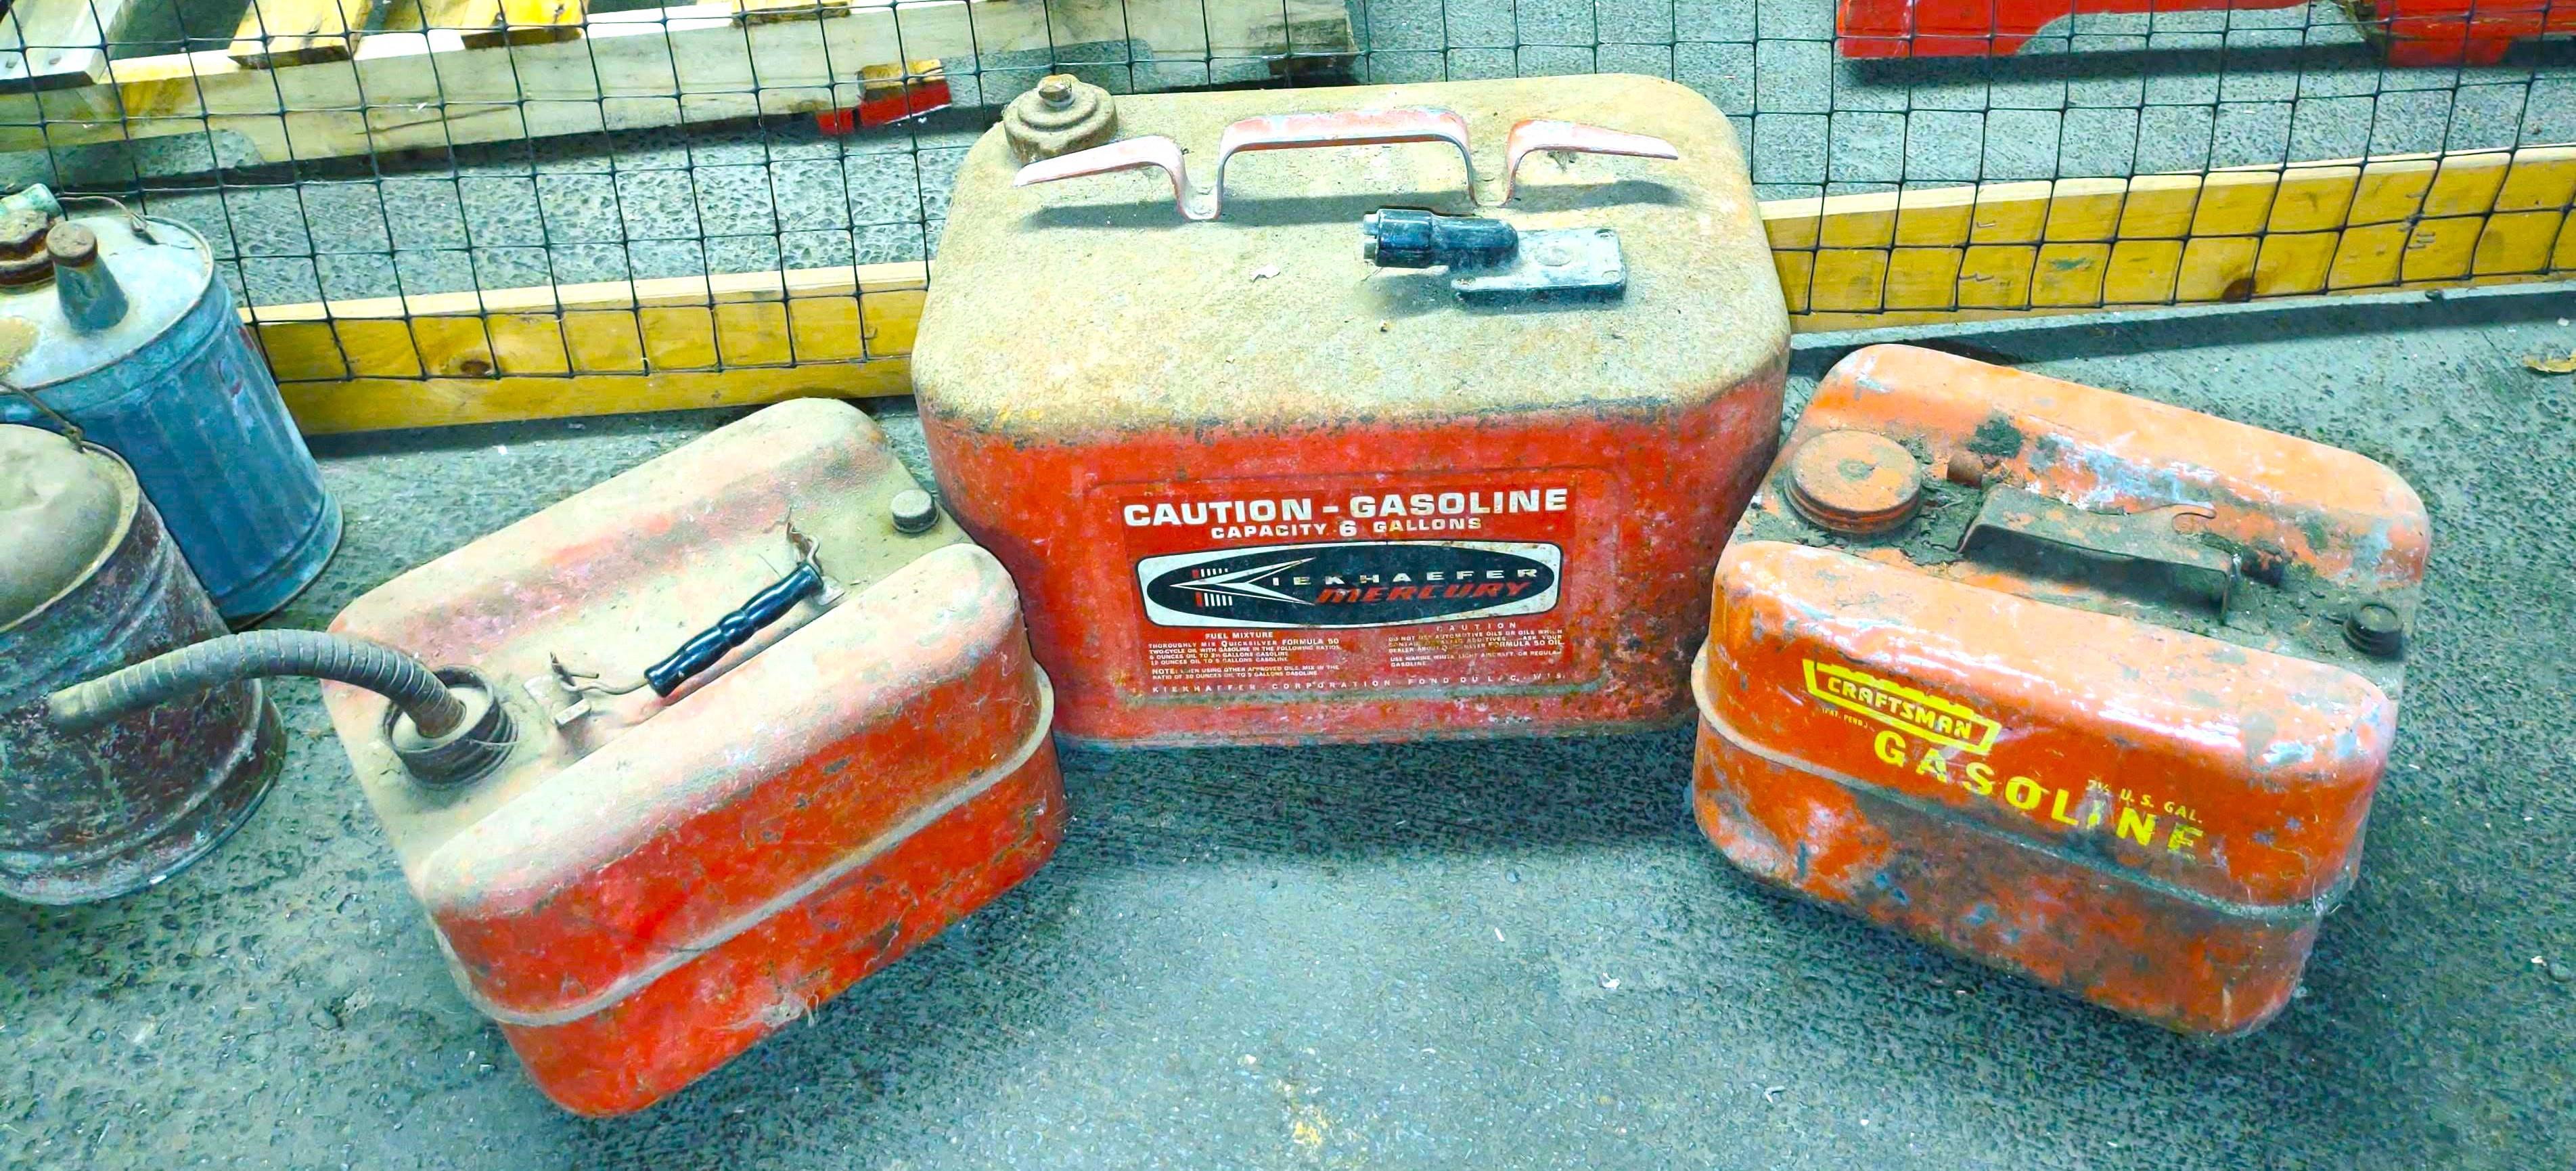 VINTAGE BOAT GAS CANS - PICK UP ONLY